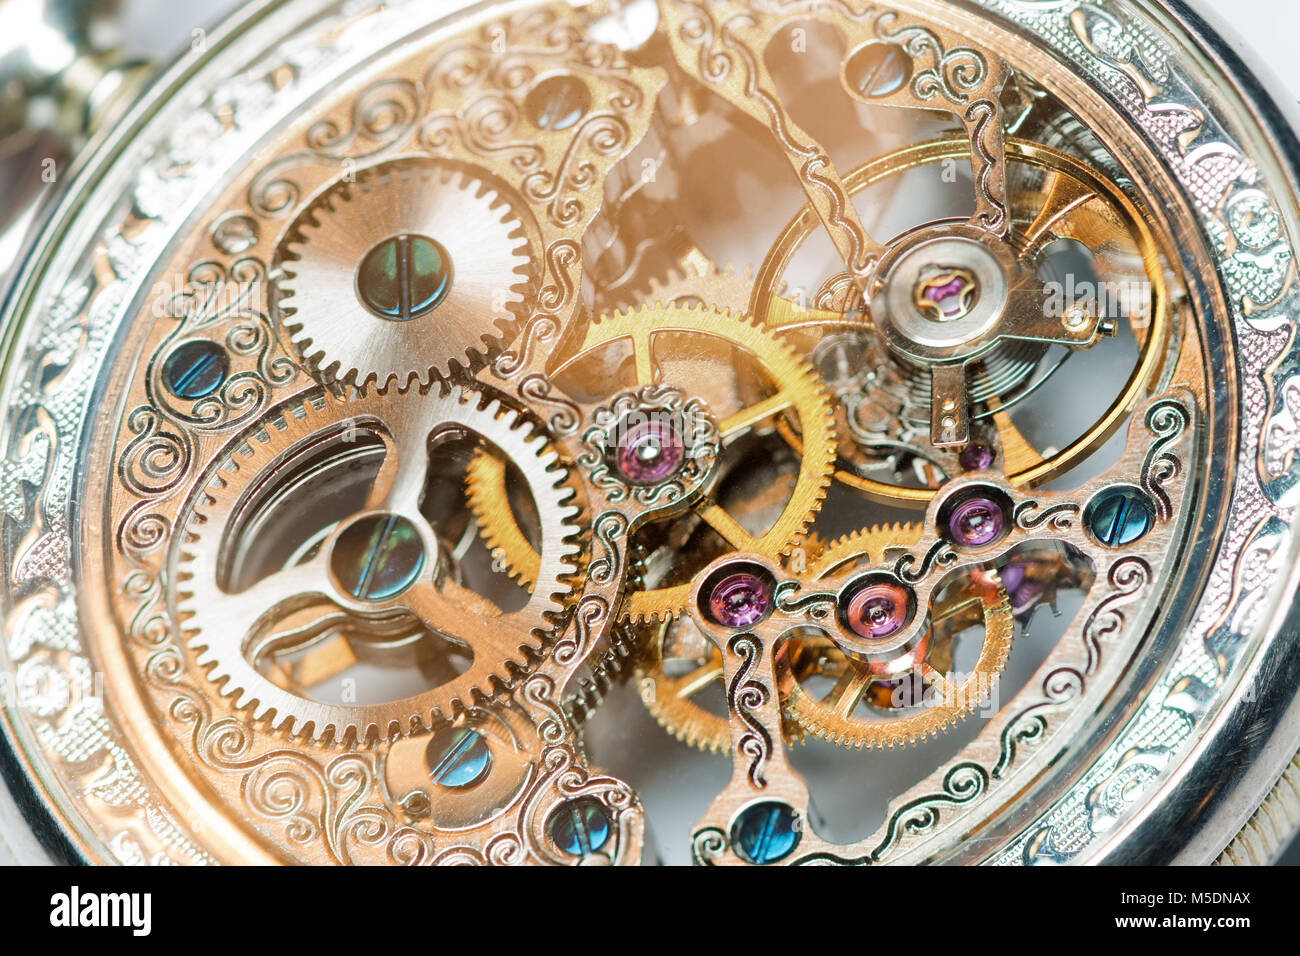 close view of a vintage beautiful watch mechanism Stock Photo